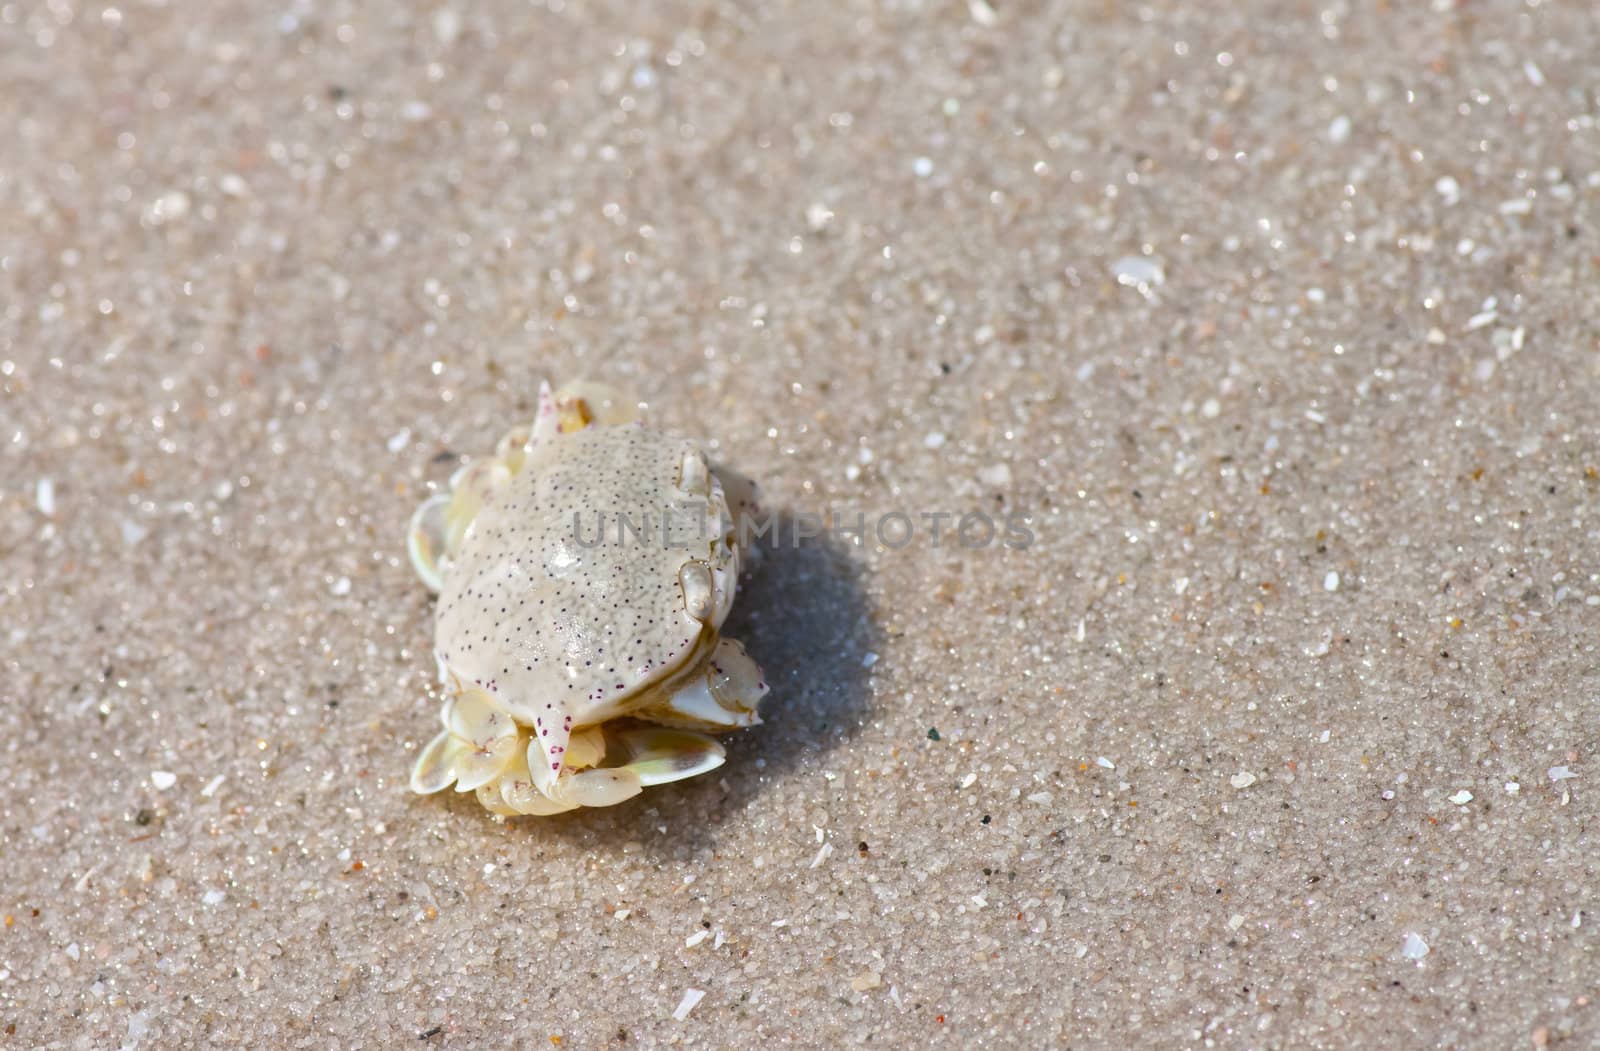 Crabs in the sand.